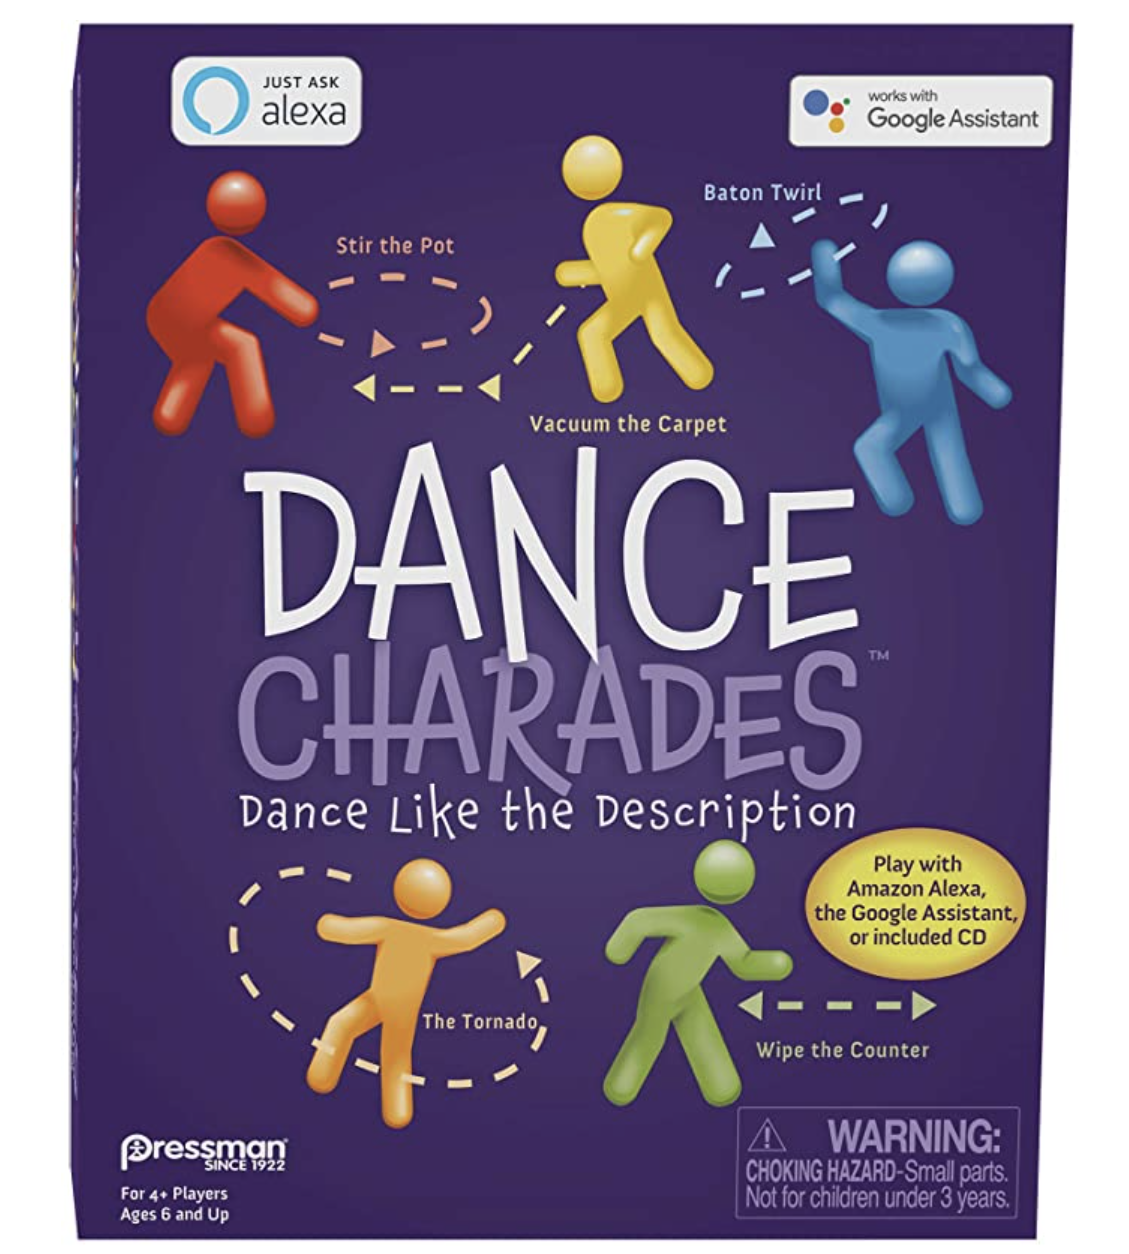 Image of dance charades game